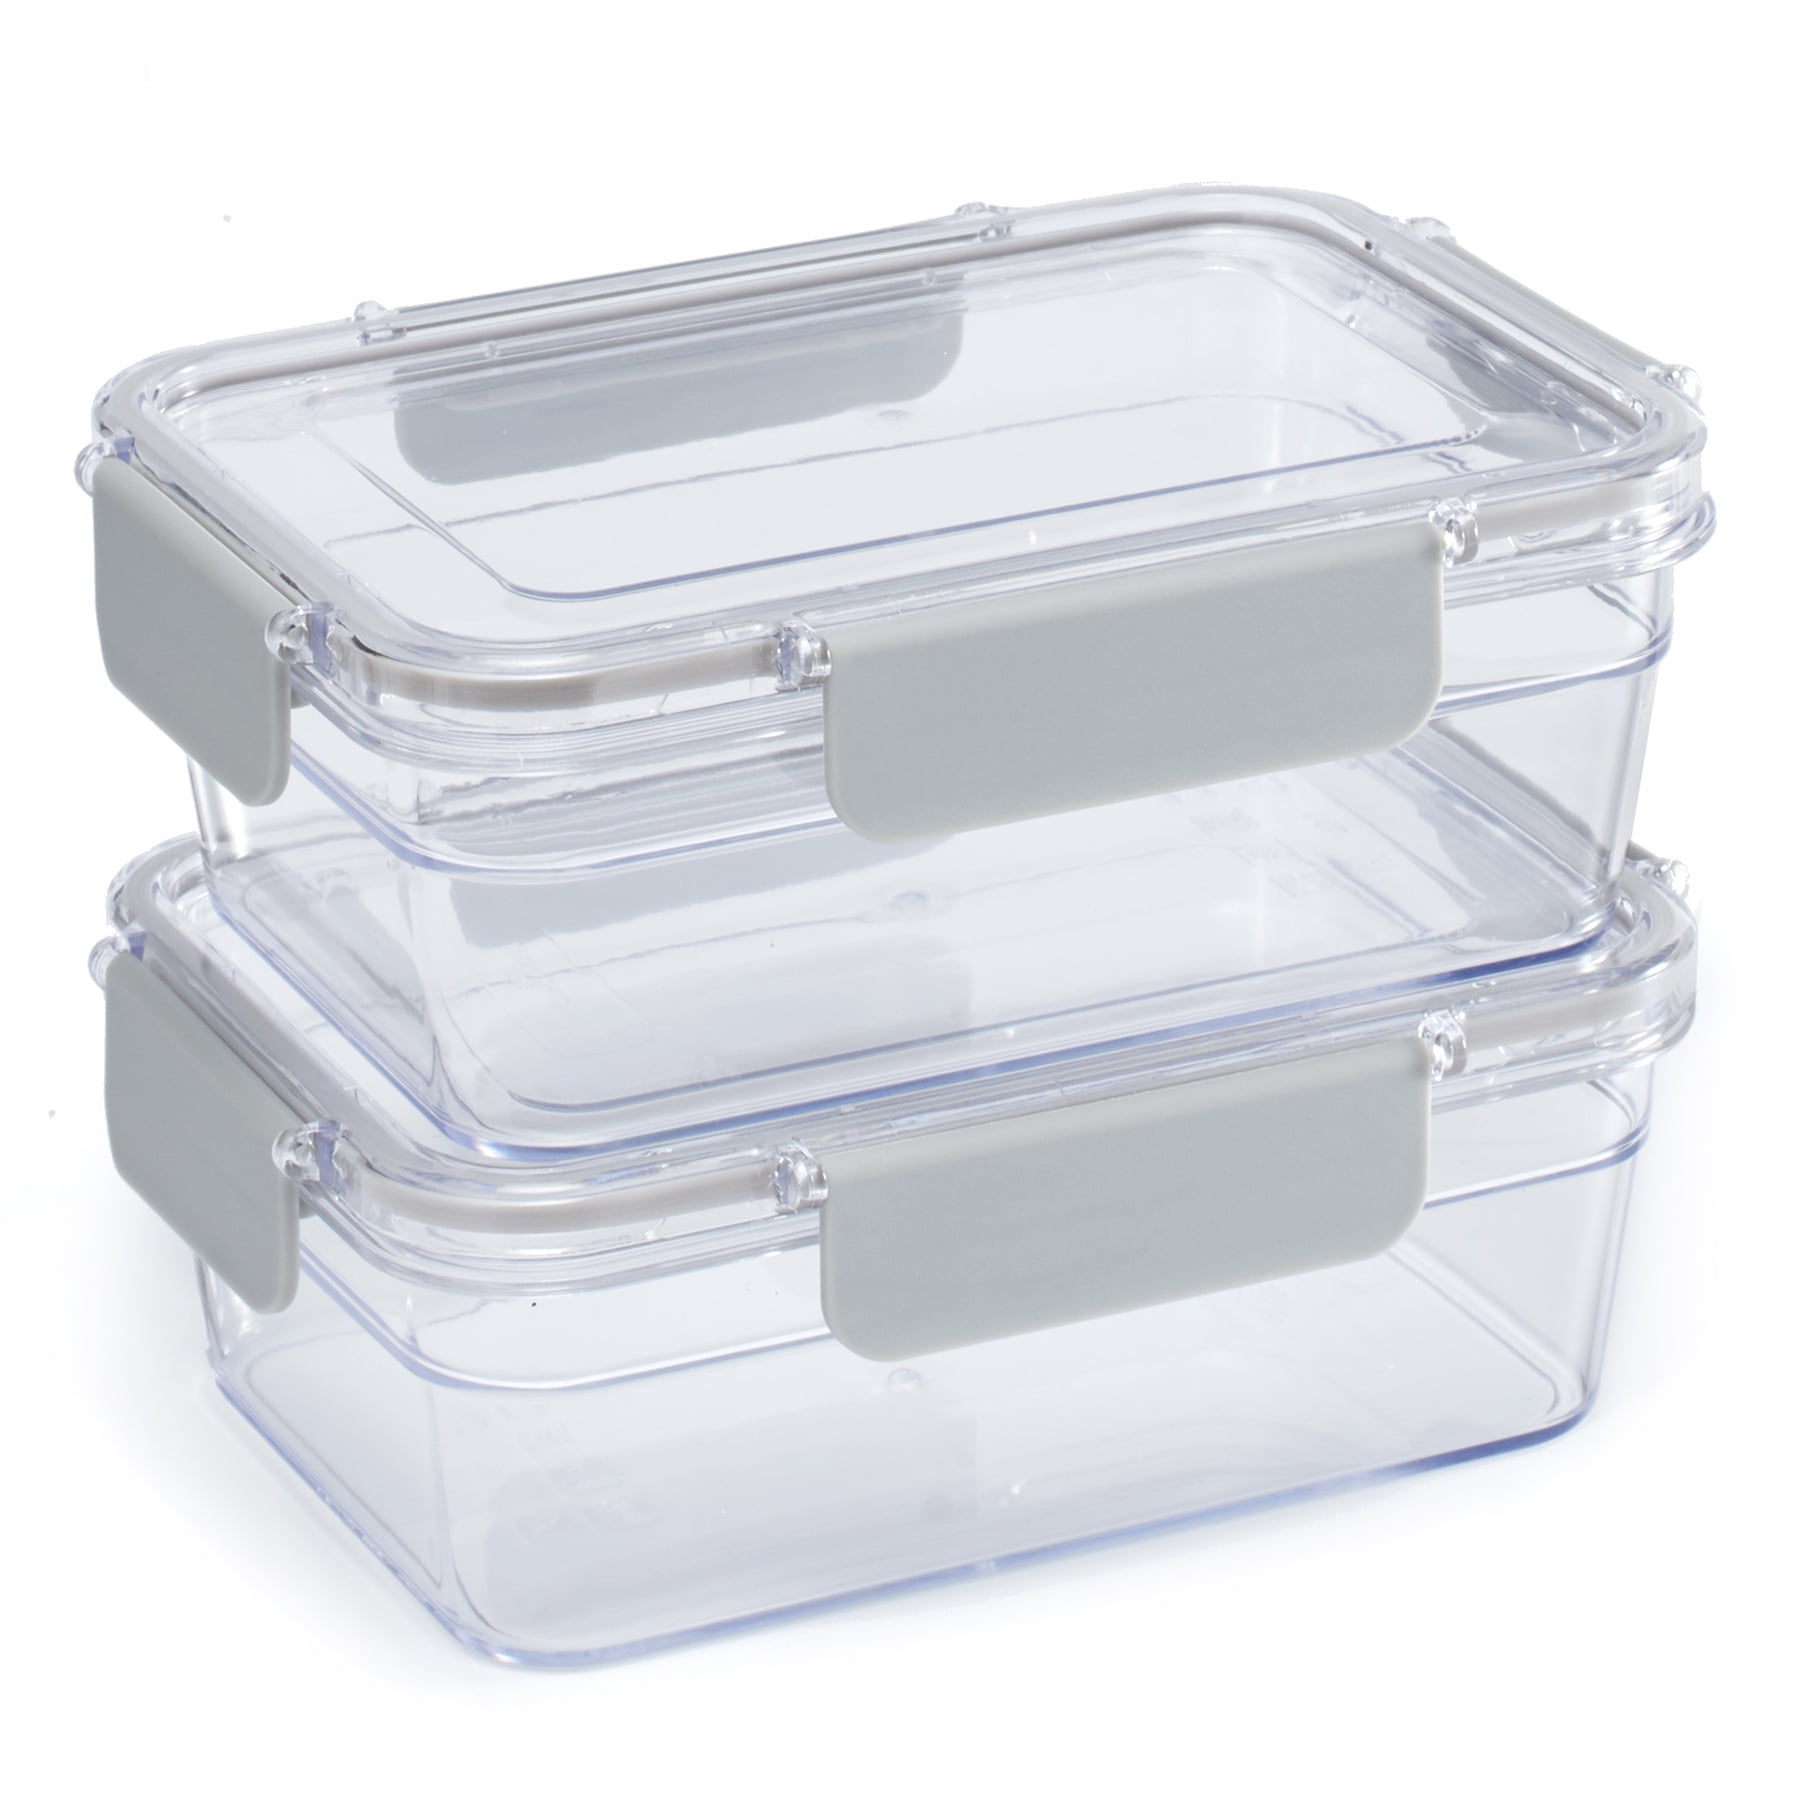 Tupperware Brand Modular Mates Squares Set - 4 Dry Food Storage Containers  with Lids (5 Cup, 11 Cup, 17 Cup & 23 Cup Sizes) - Airtight, Dishwasher